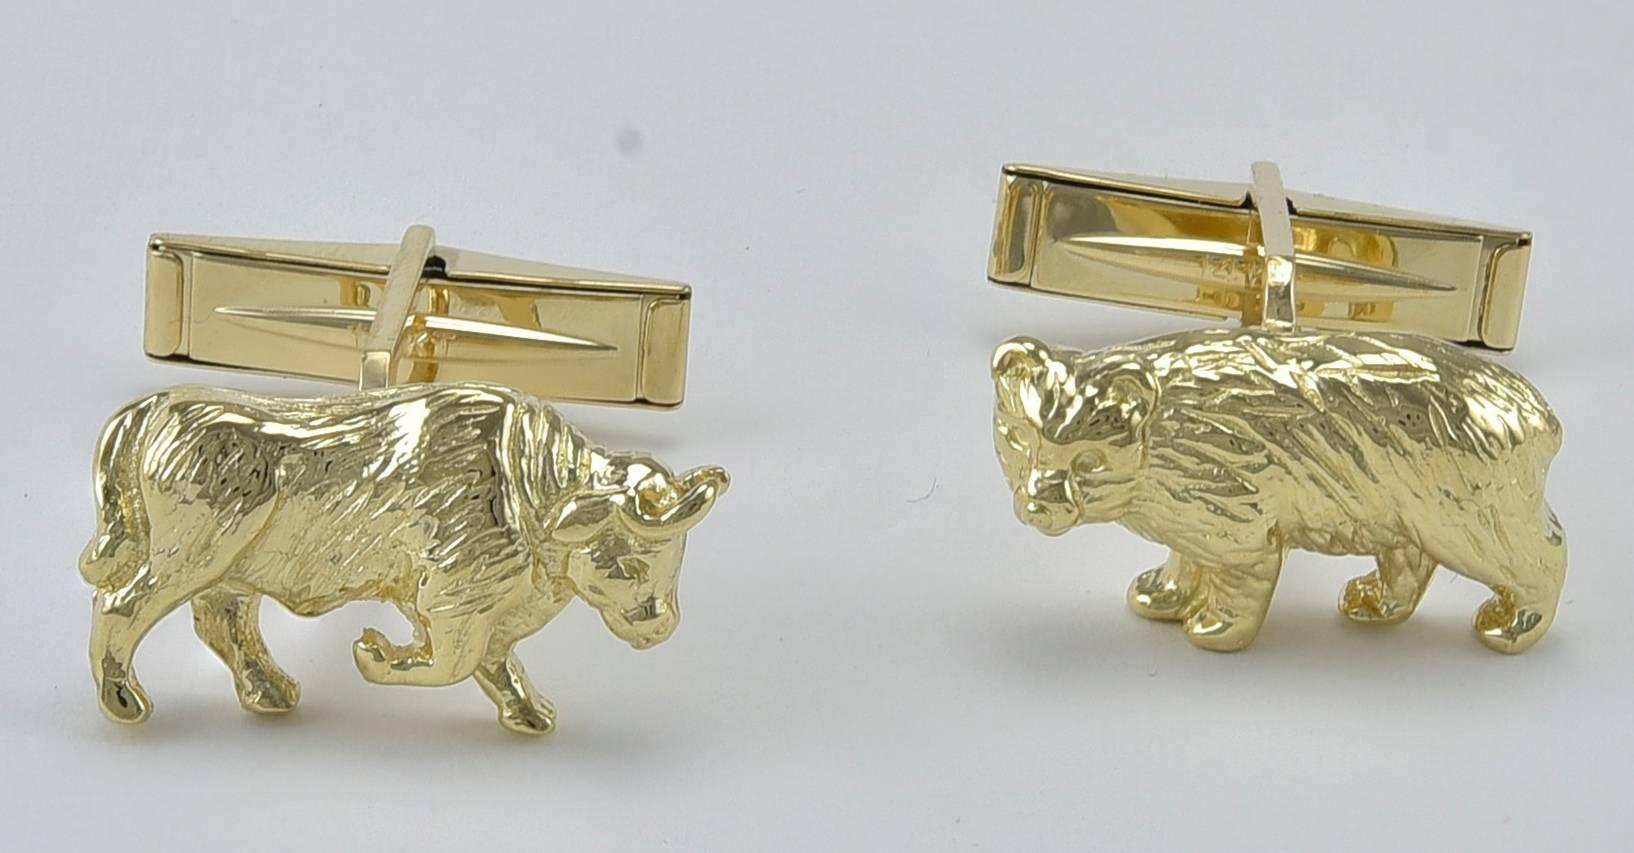 Figural bull and bear cufflinks. 14K textured yellow gold. Good subject; well done.

Alice Kwartler has sold the finest antique gold & diamond jewelry and silver for over 40 years.